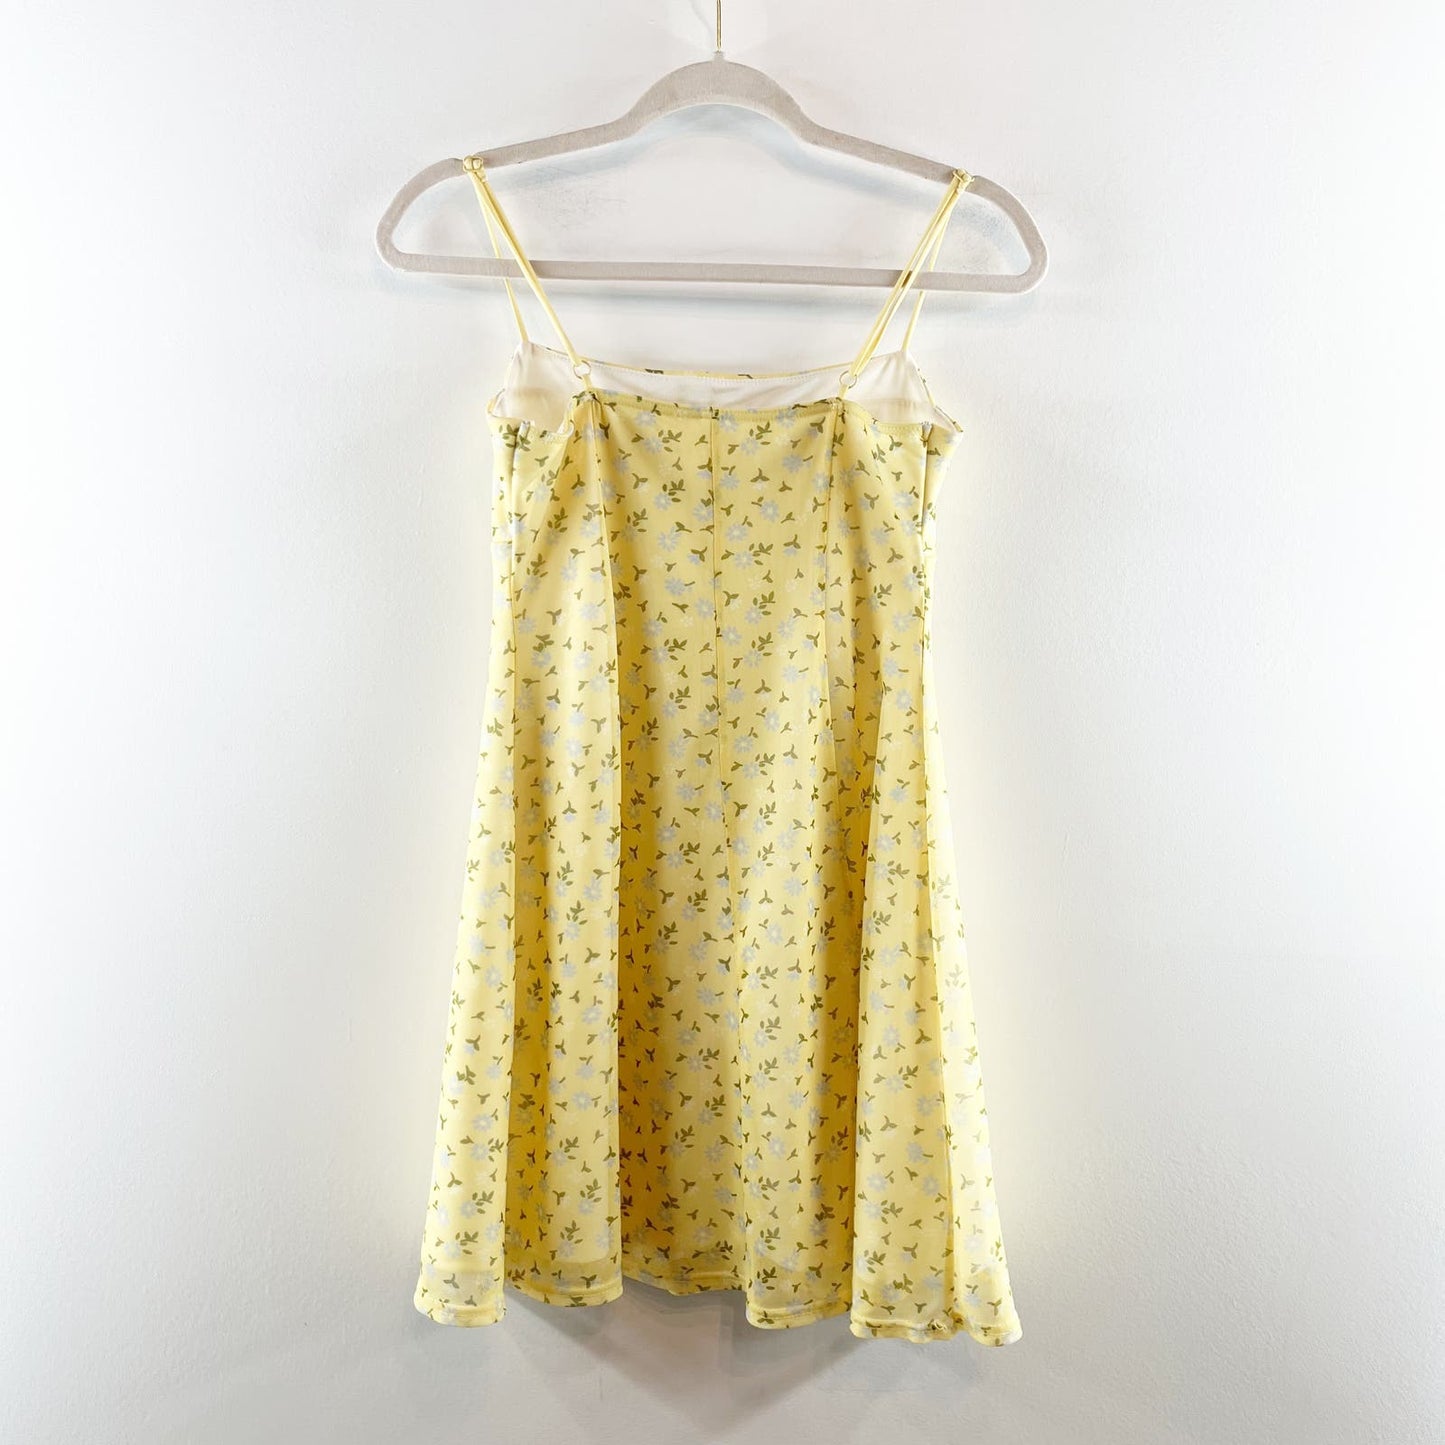 Urban Outfitters Peaches Floral Mesh Mini Y2K Slip Dress Yellow Small